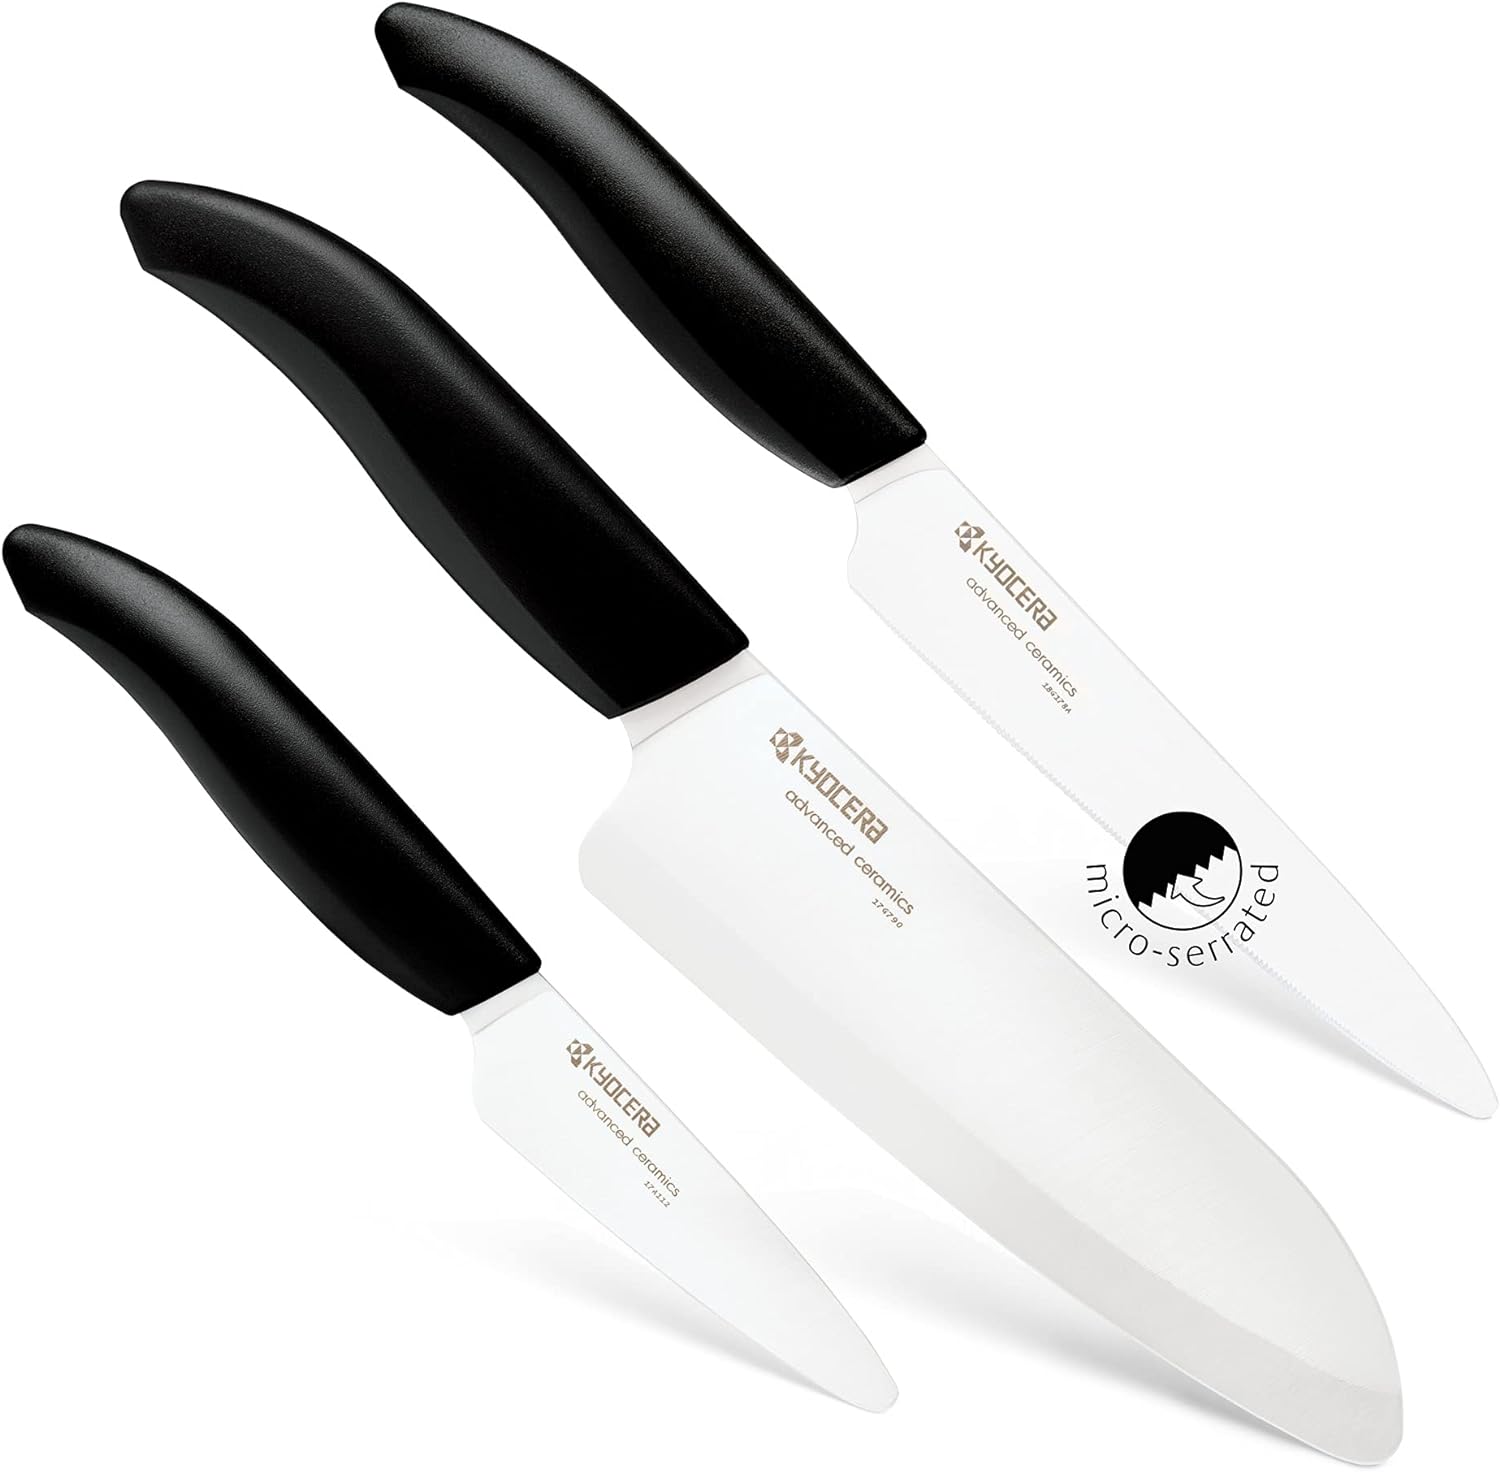 Kyocera Advanced Ceramic Revolution 3-Piece Ceramic Knife Set-( Includes 6-inch Chef's Knife, 5-inch Micro Serrated Knife and 3-inch Paring Knife )